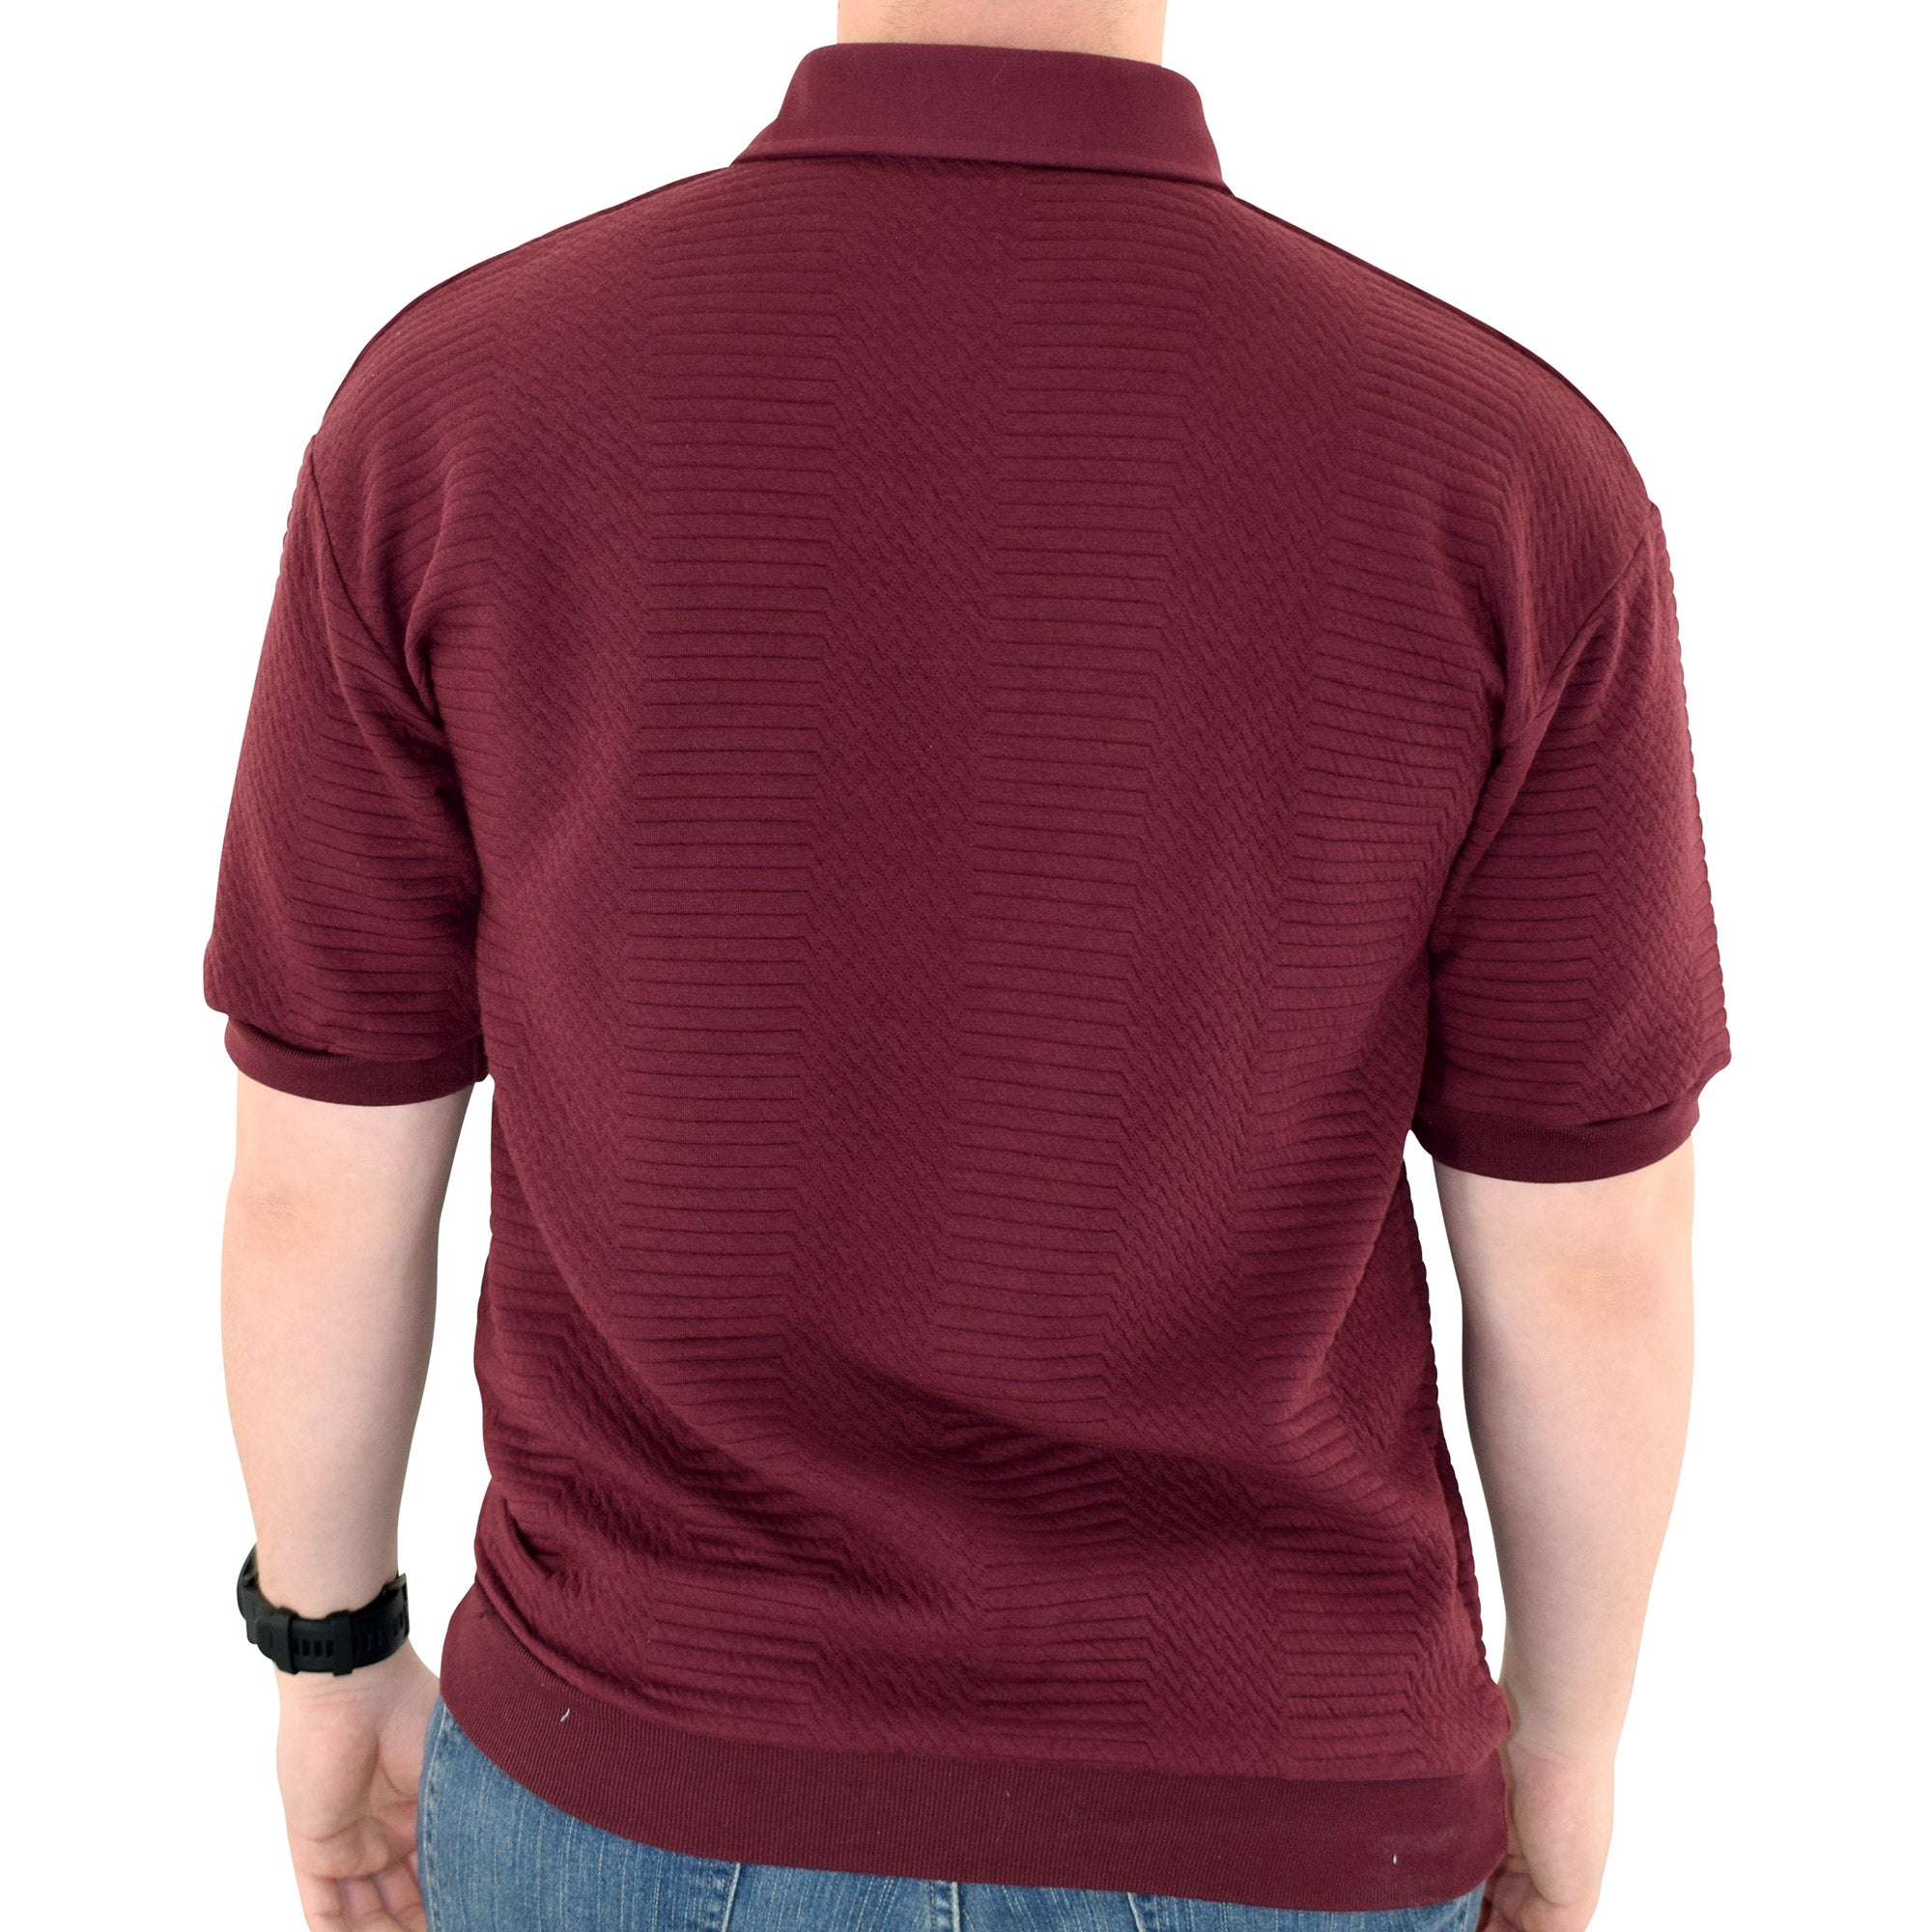 This Safe Harbor Solid Pique Banded Bottom Shirt is made of 60